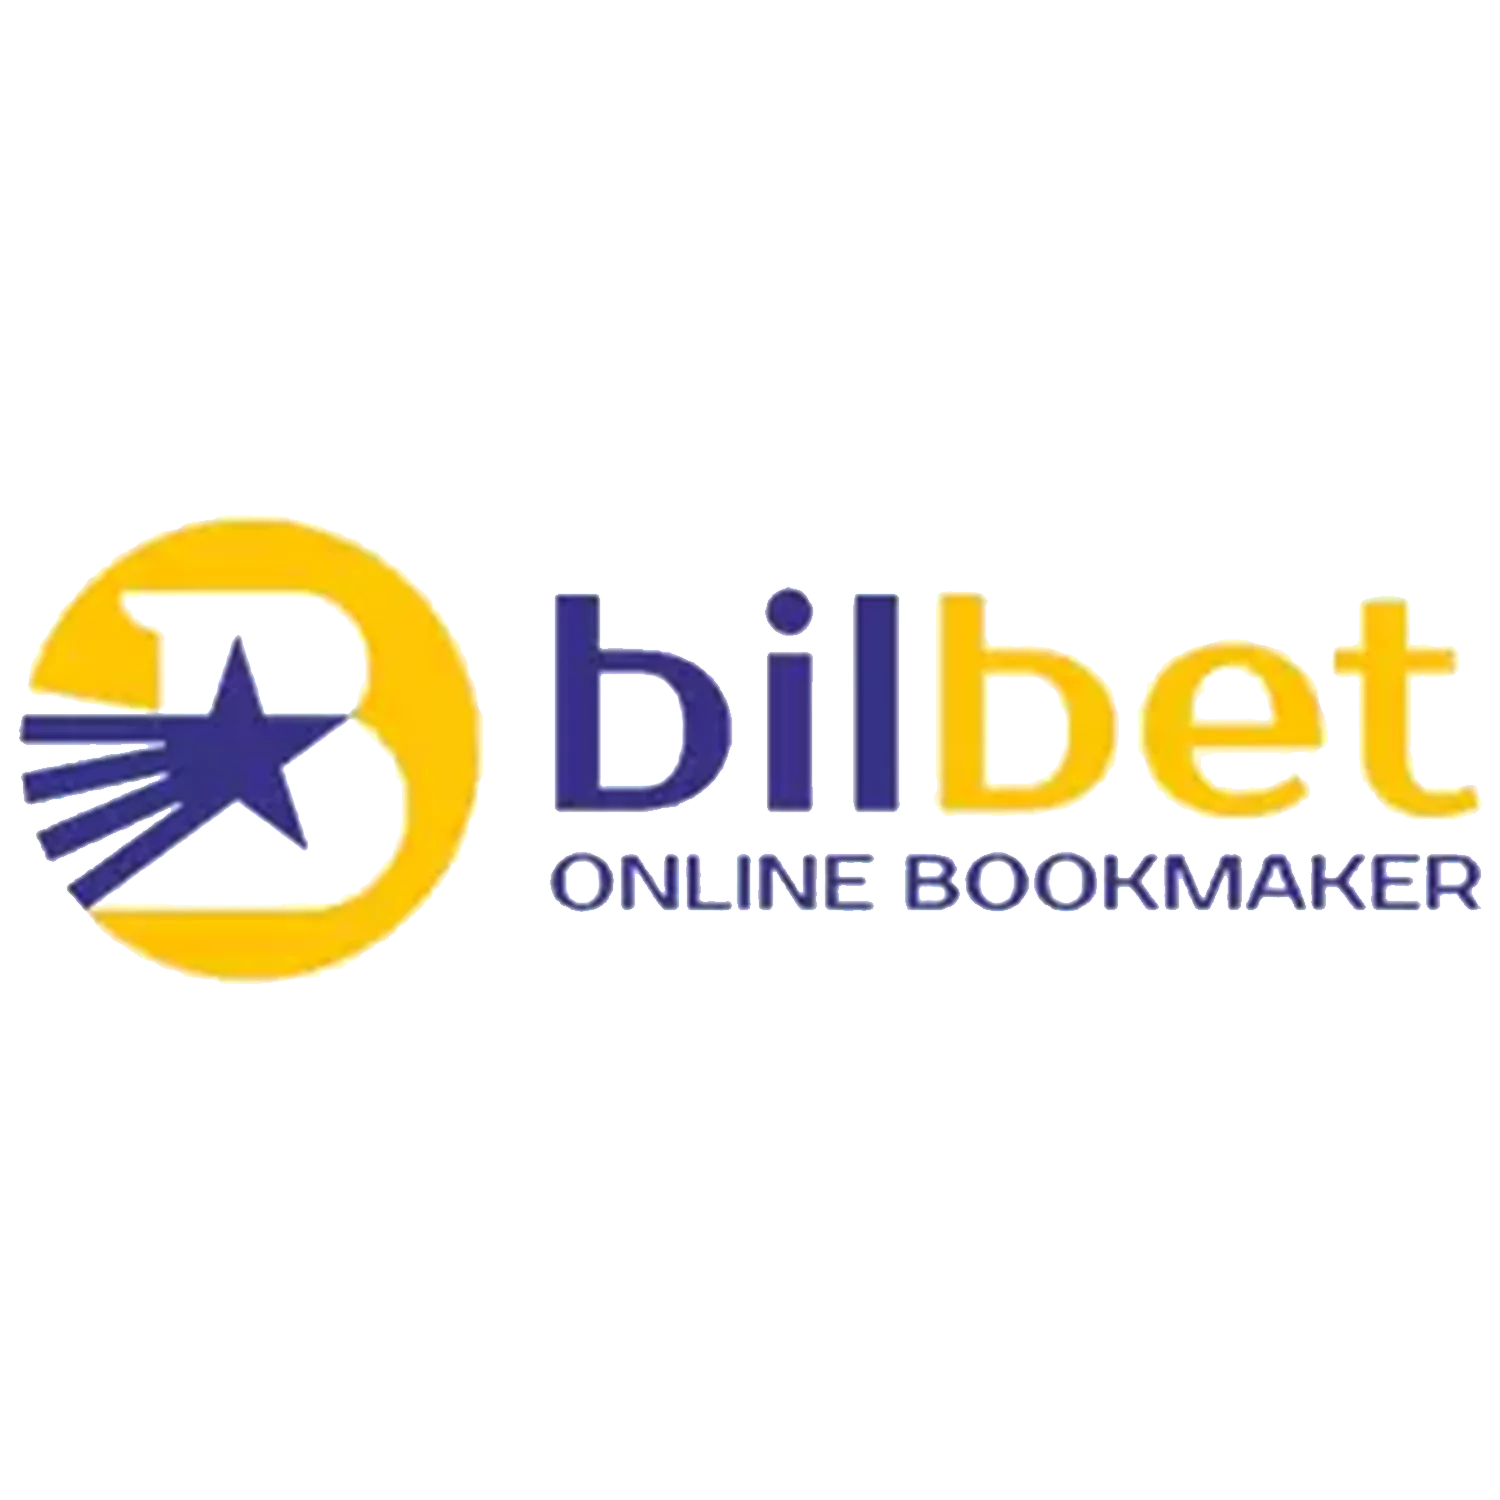 Bilbet is legal in India for online cricket betting.